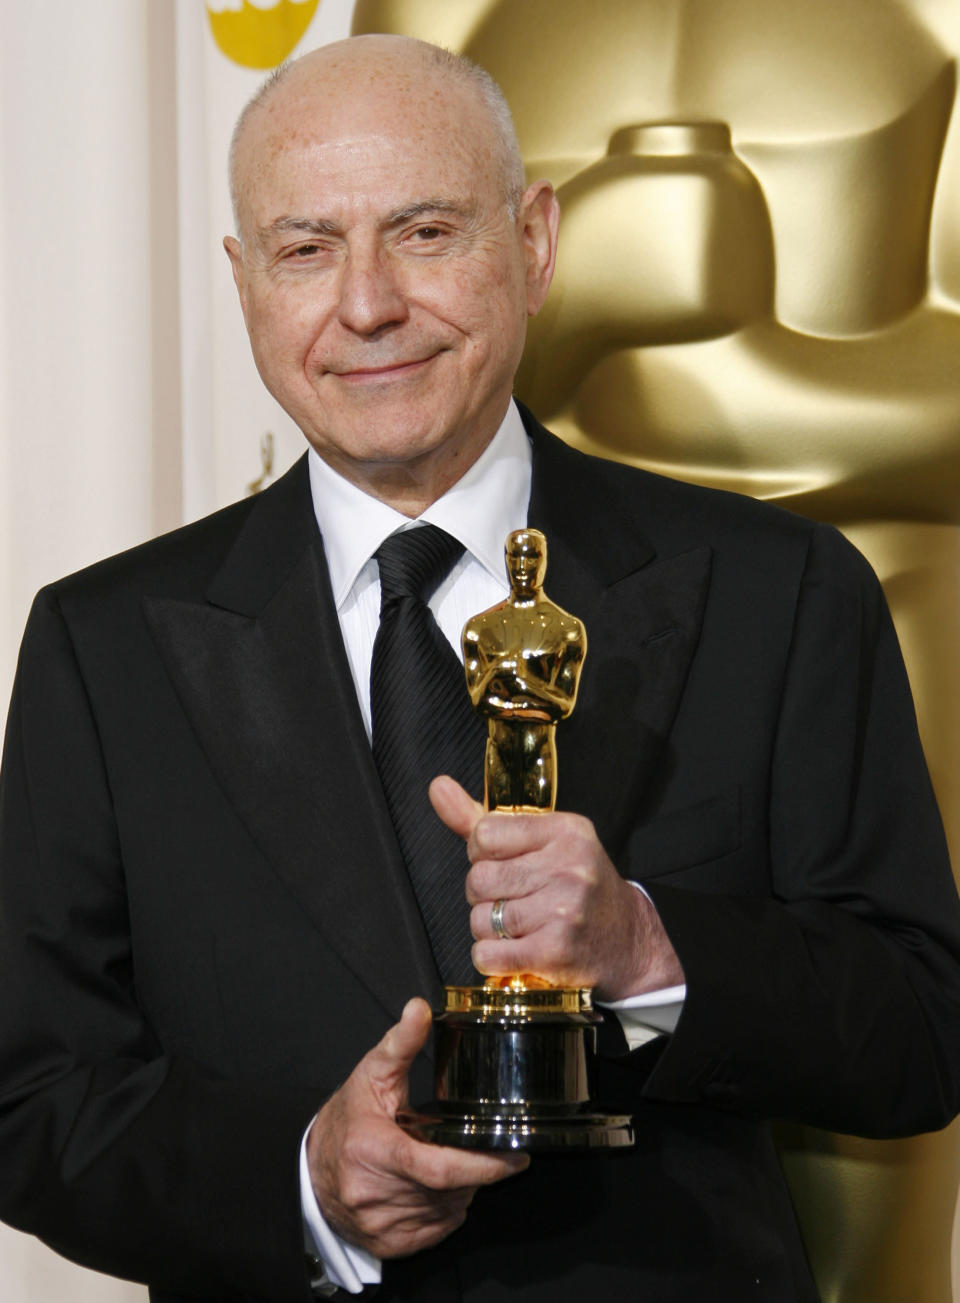 FILE - Alan Arkin poses with the Oscar he won for best supporting actor for his work in "Little Miss Sunshine" at the 79th Academy Awards Sunday, Feb. 25, 2007, in Los Angeles. Arkin, the wry character actor who demonstrated his versatility in comedy and drama as he received four Academy Award nominations and won an Oscar in 2007 for "Little Miss Sunshine," has died. He was 89. (AP Photo/Kevork Djansezian, File)